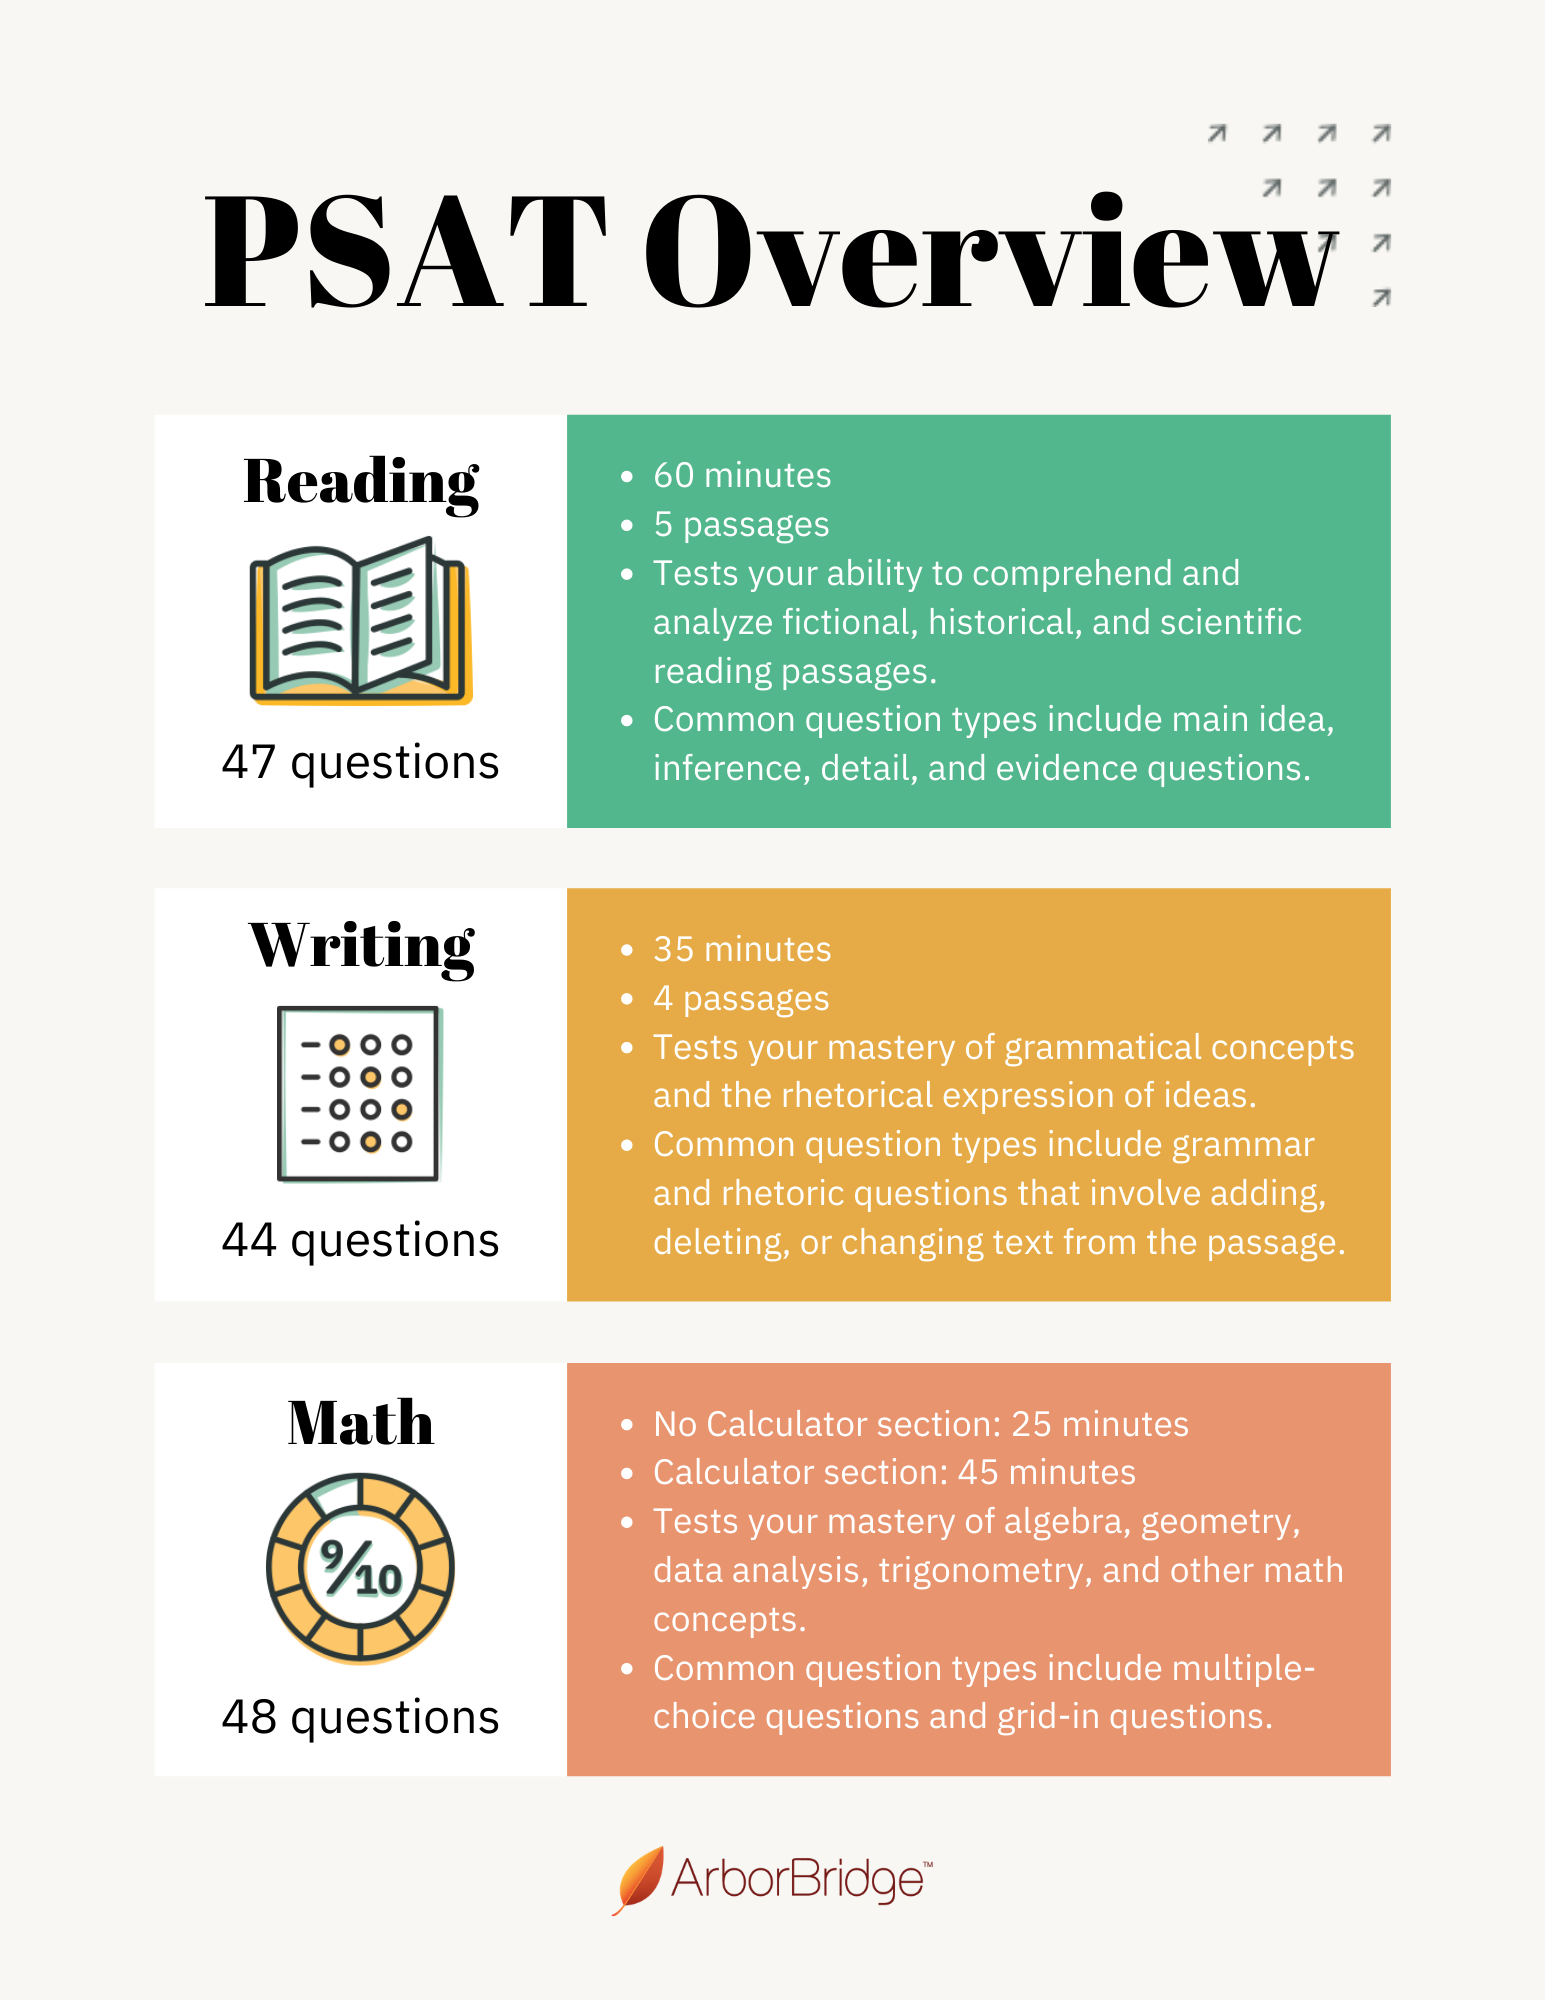 does the psat include an essay